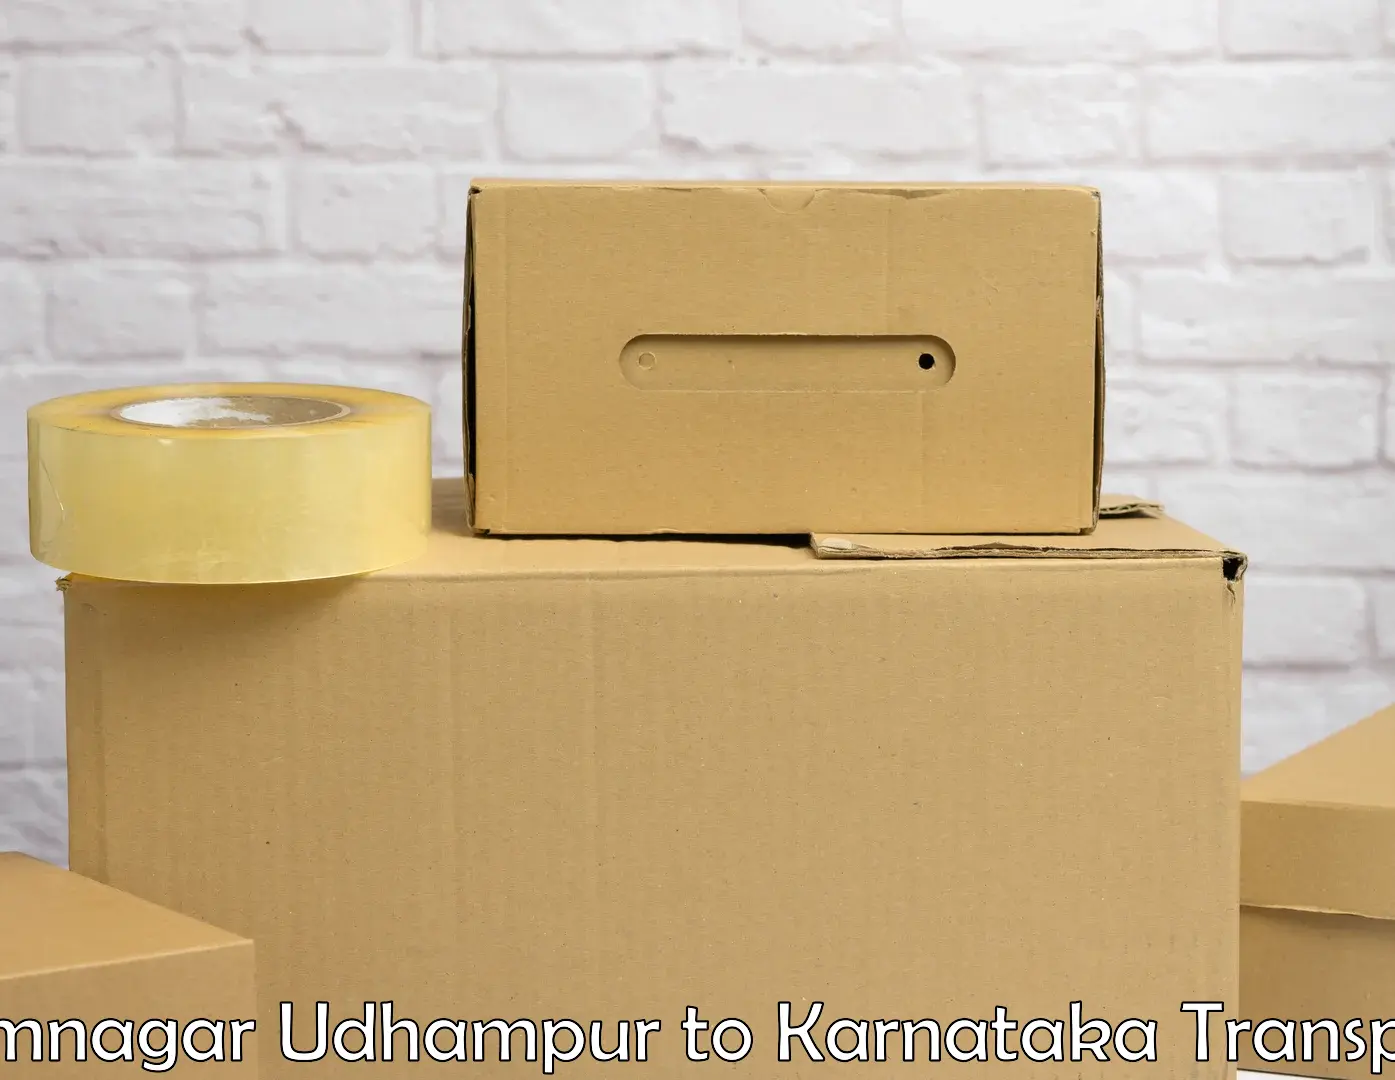 Nationwide transport services in Ramnagar Udhampur to Mysore